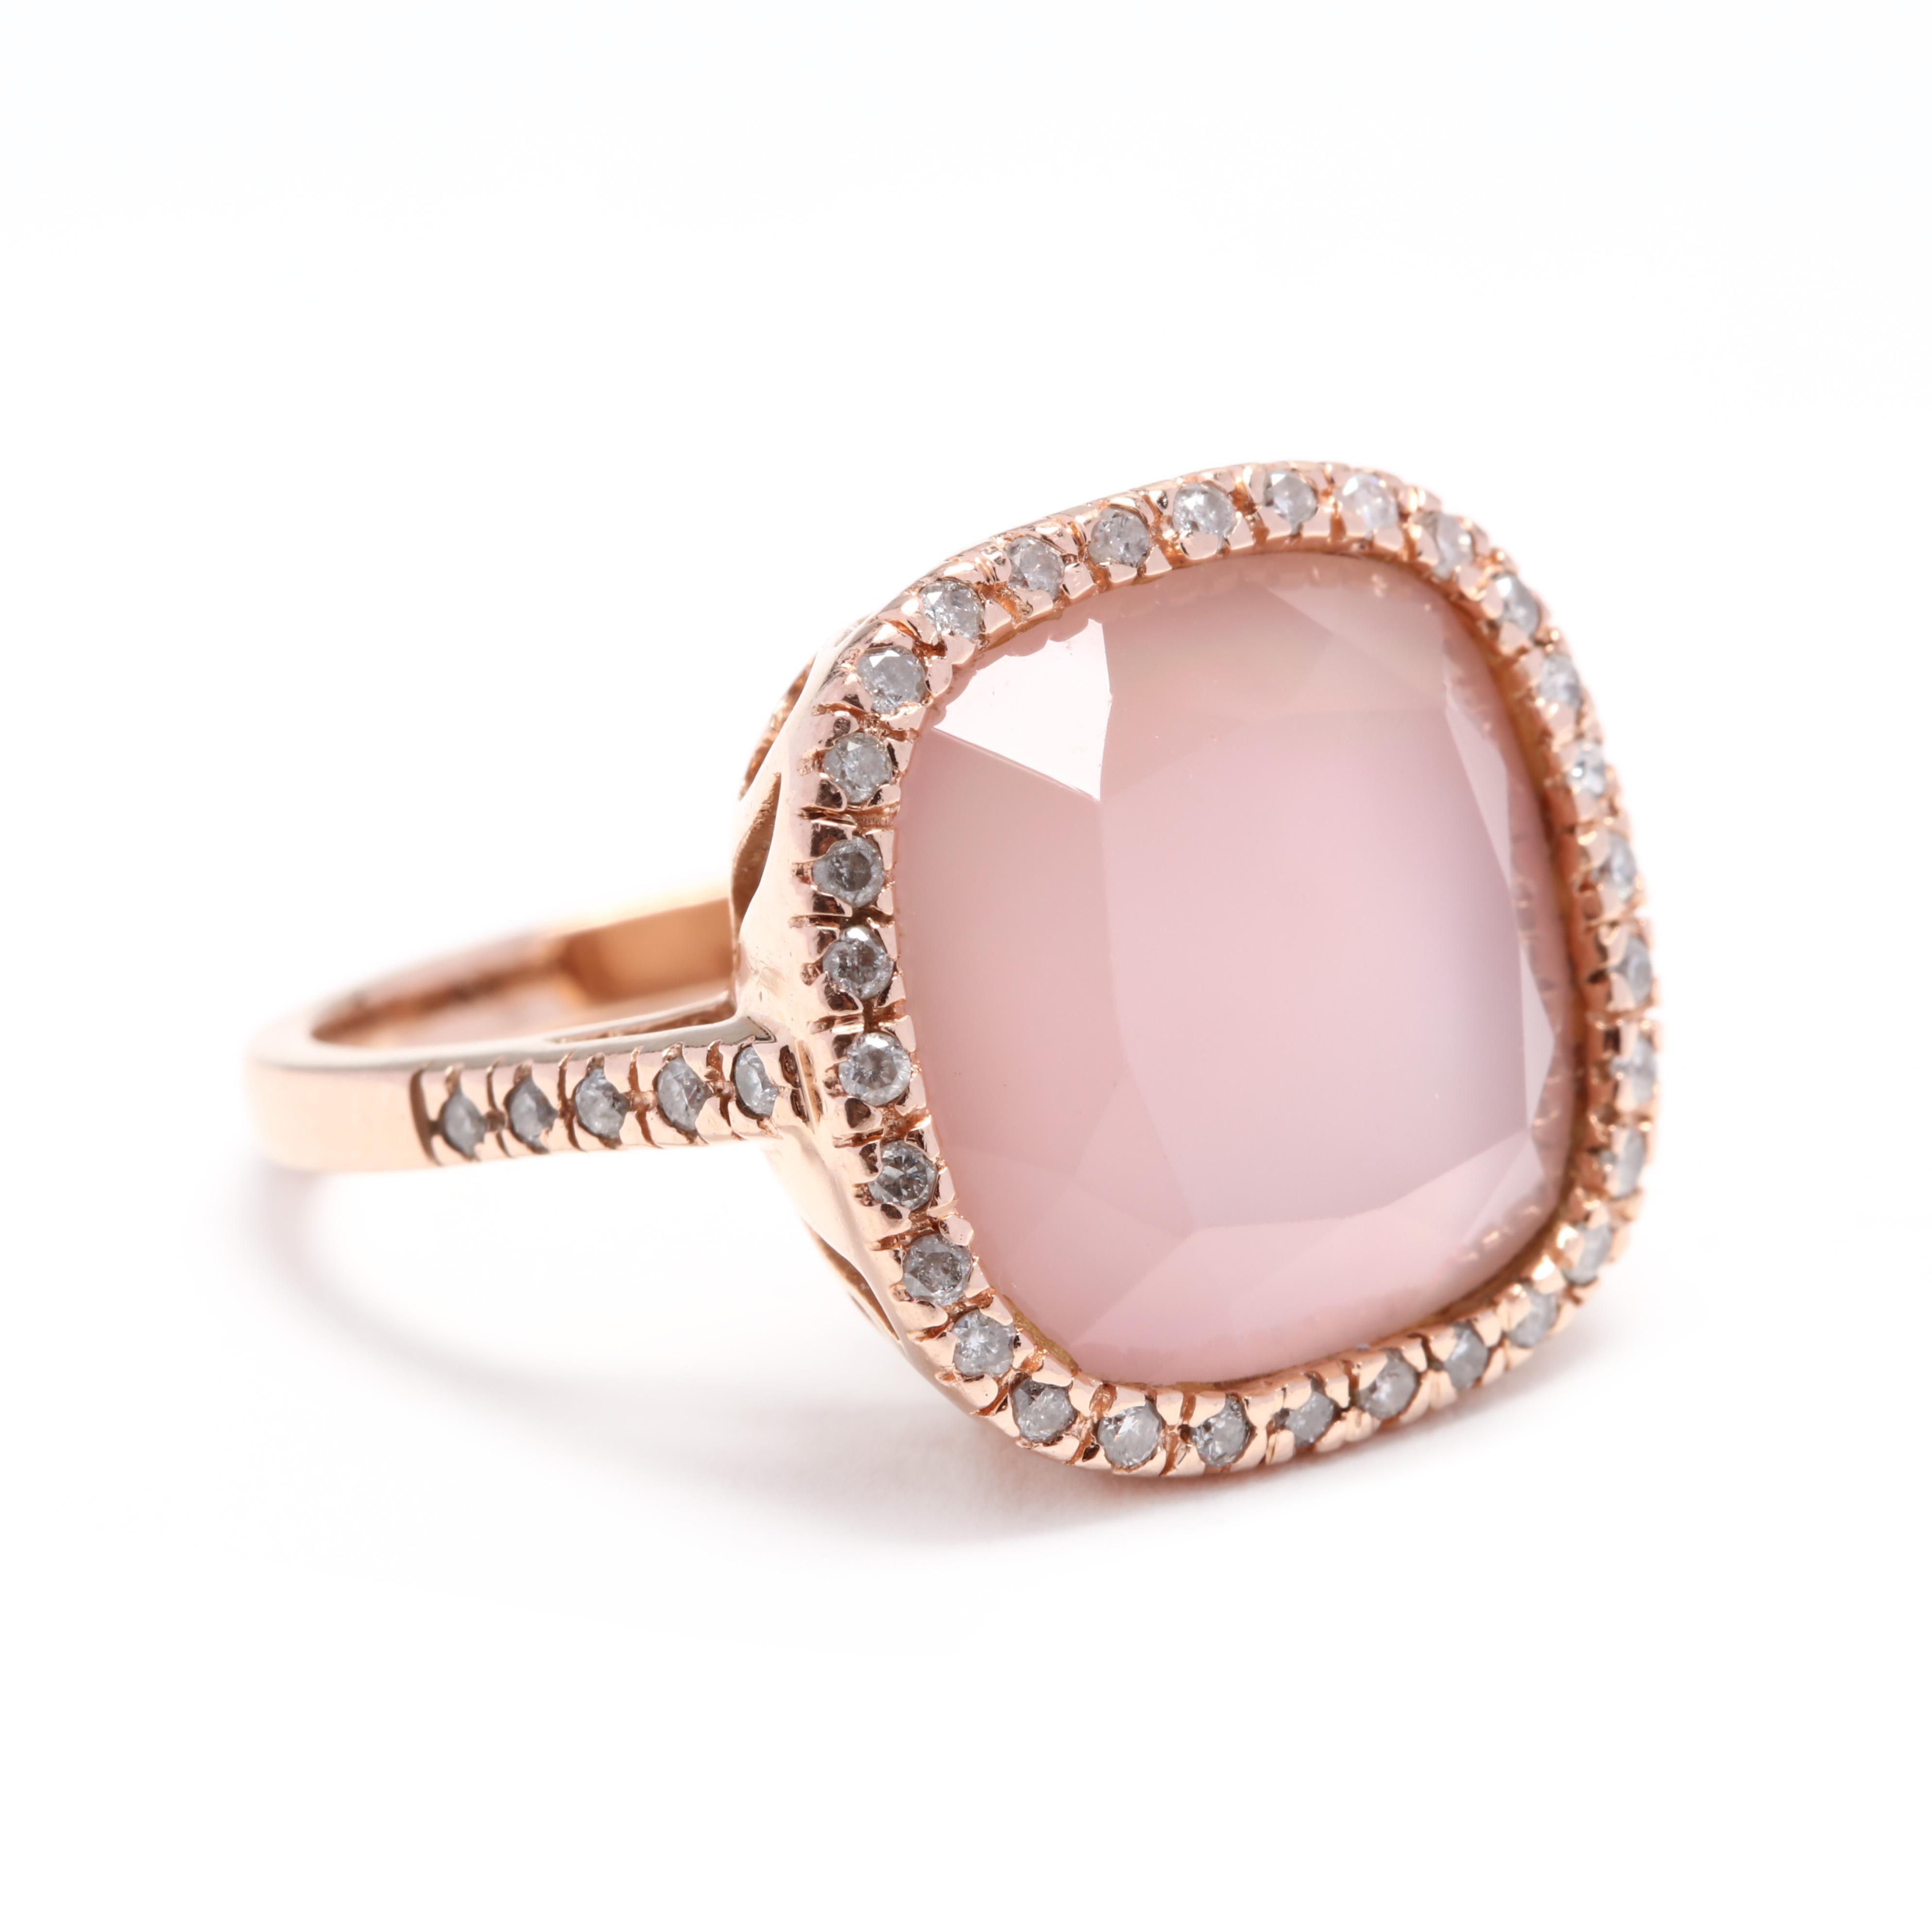 A modern 14 karat rose gold, rose quartz, mother of pearl, and diamond ring. A table cut rose quartz and mother of pearl doublet center stone surrounded by a halo of full cut diamonds and down the shank.

Stones:
- rose quartz & mother of pearl, 1